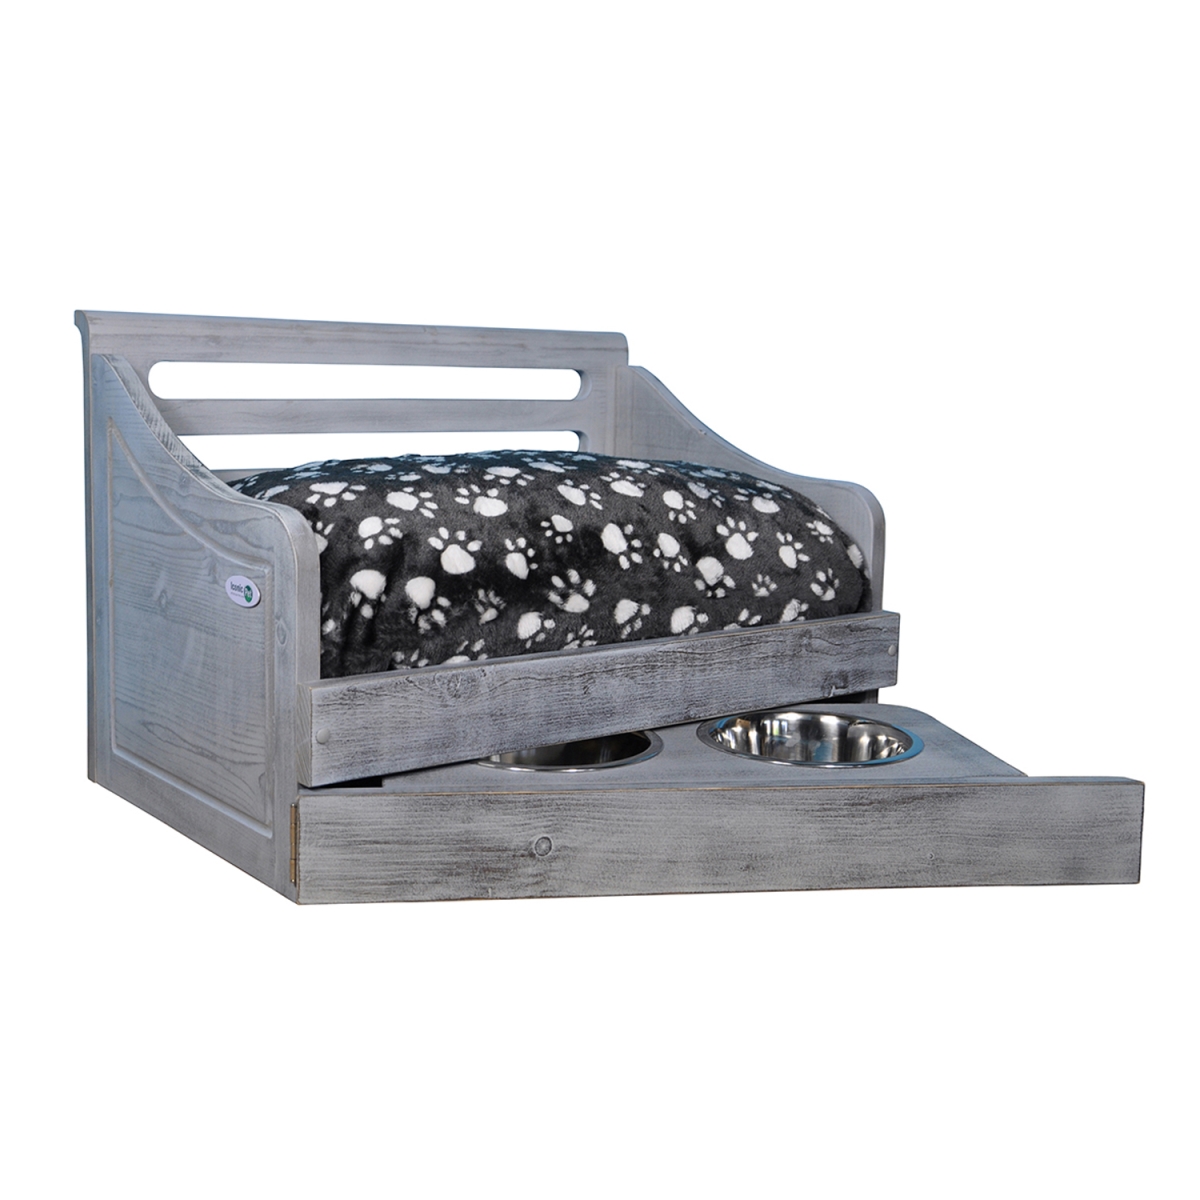 Picture of Iconic Pet 52052 Sassy Paws Multipurpose Wooden Pet Bed with Feeder, Antique Gray - Medium